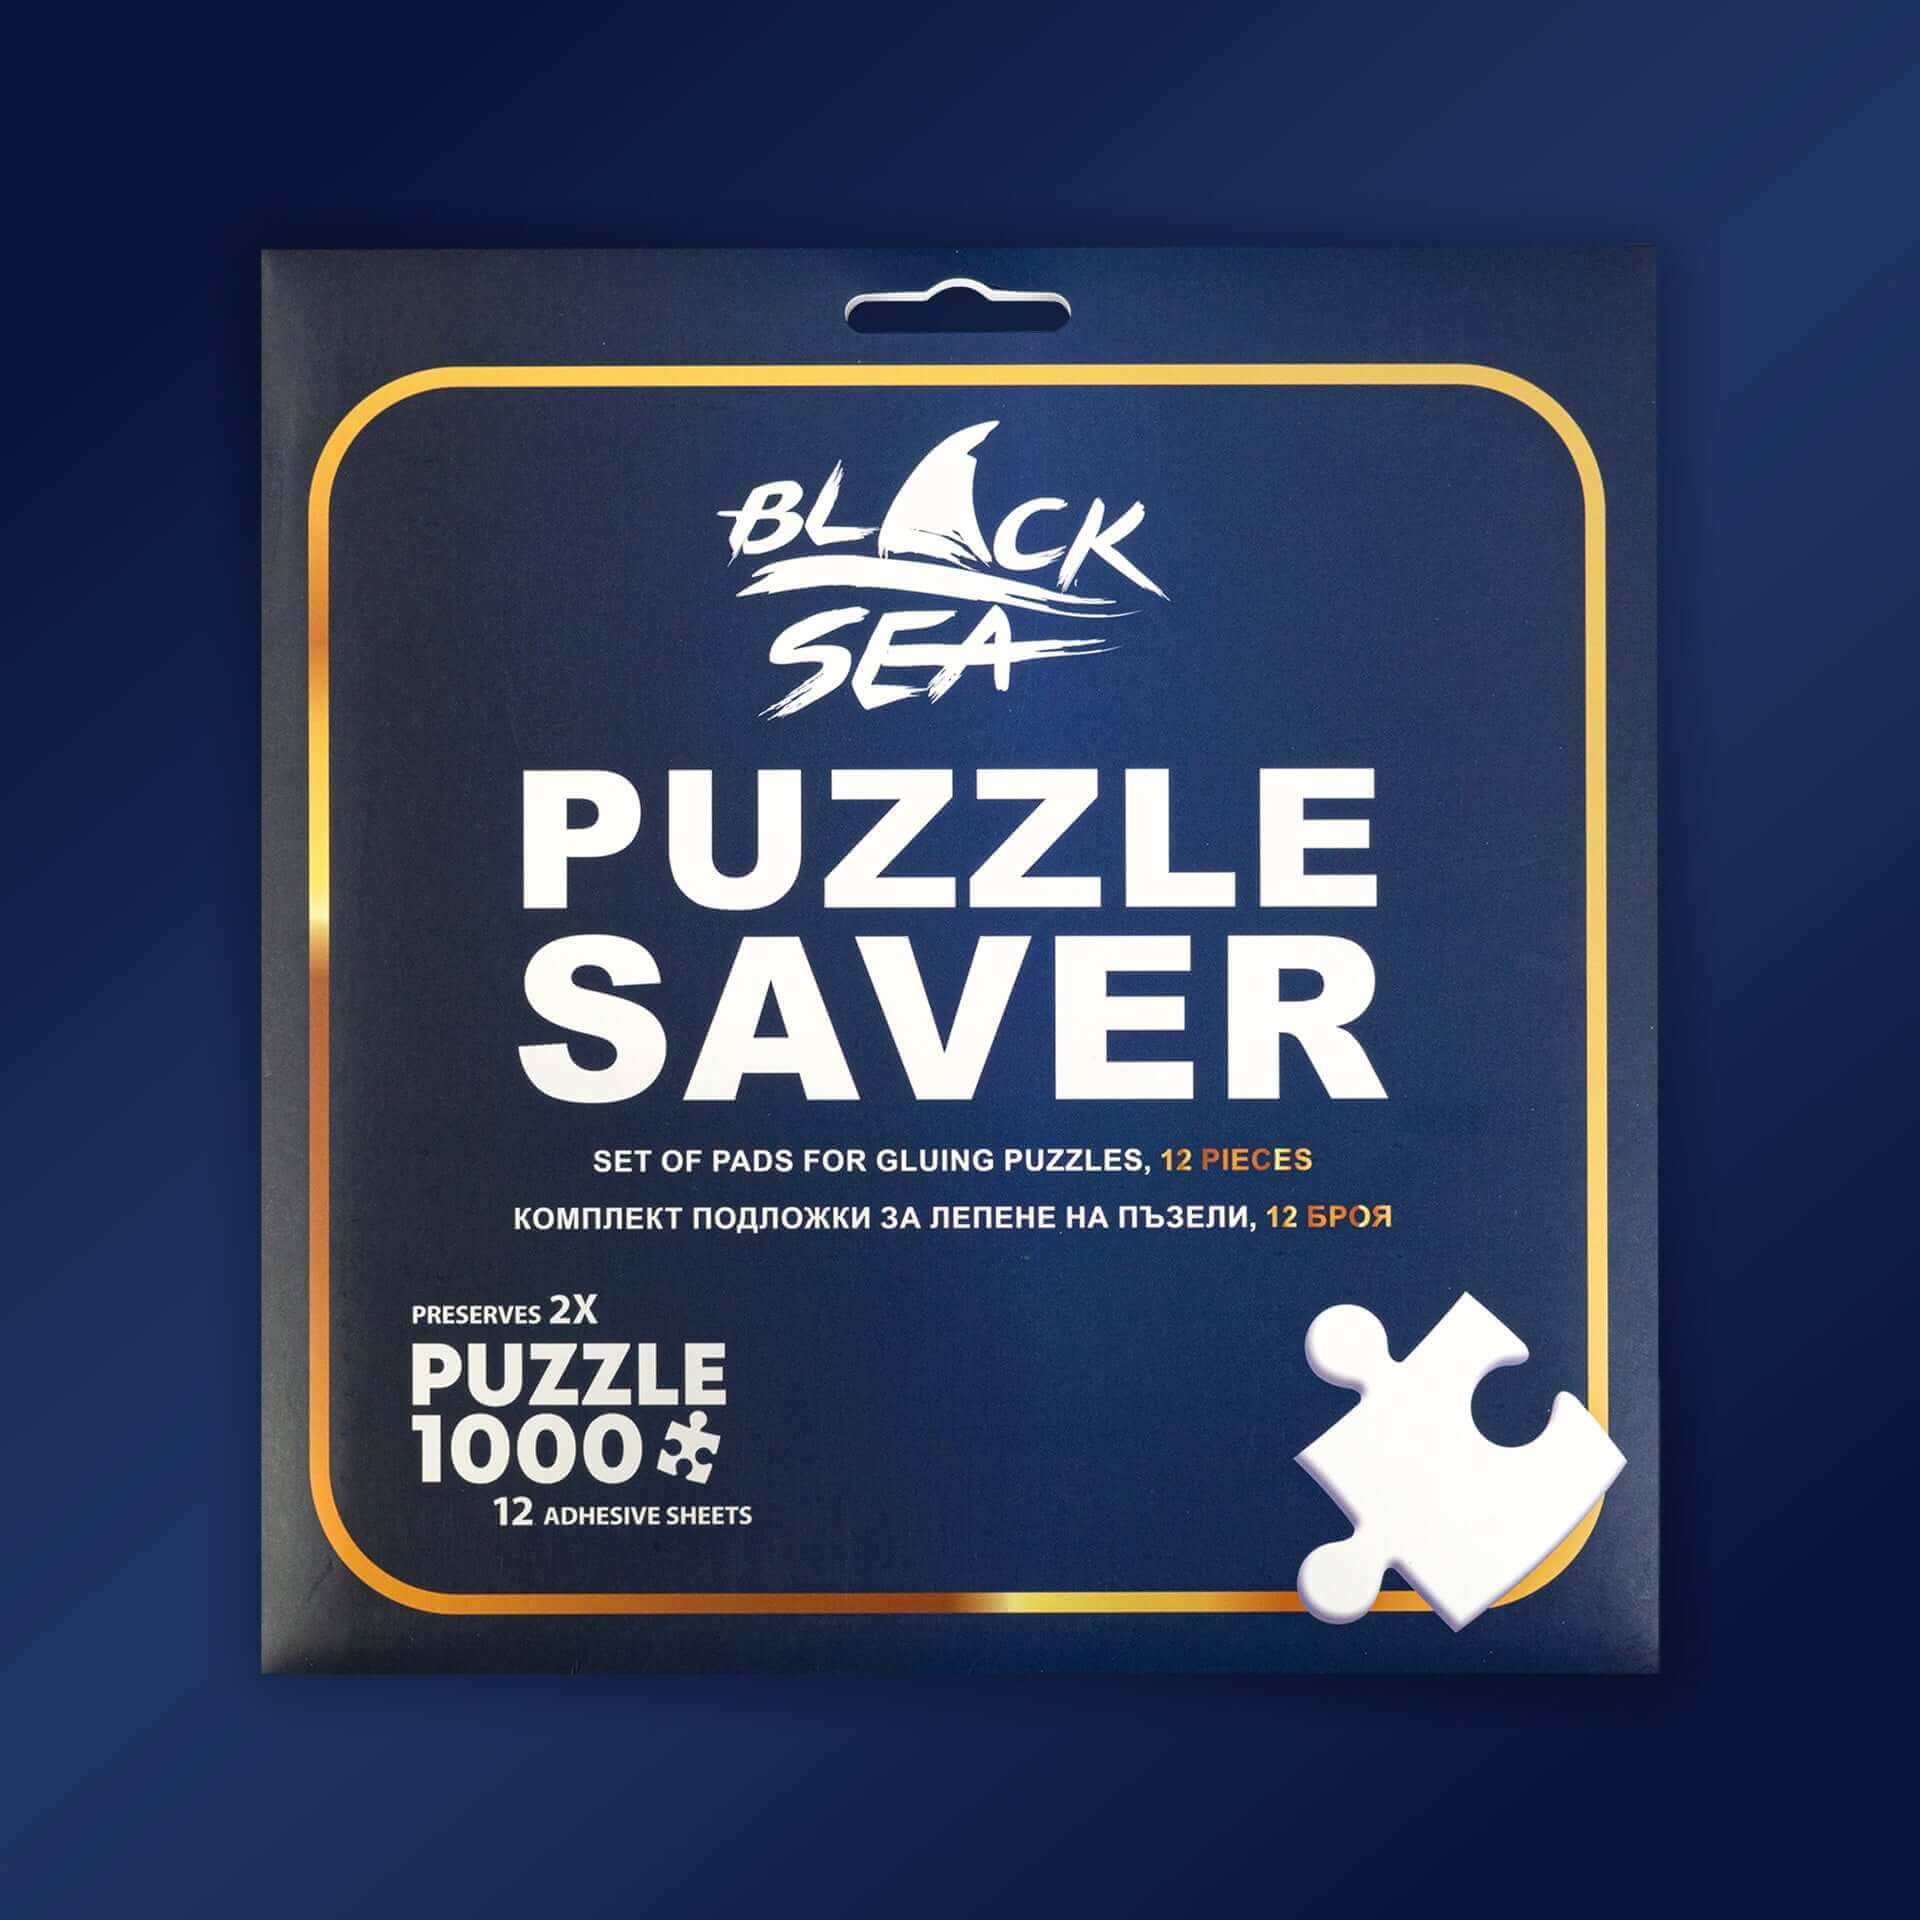 Black Sea Puzzles - Puzzle Saver, Set of puzzle saver stickers by Black Sea. Contents: 12 pieces of adhesive stickers measuring 19 x 38 cm each; Instructions. The stickers can secure 2 puzzles with 1000 pieces, 1 puzzle with 2000 pieces, or 4 puzzles with